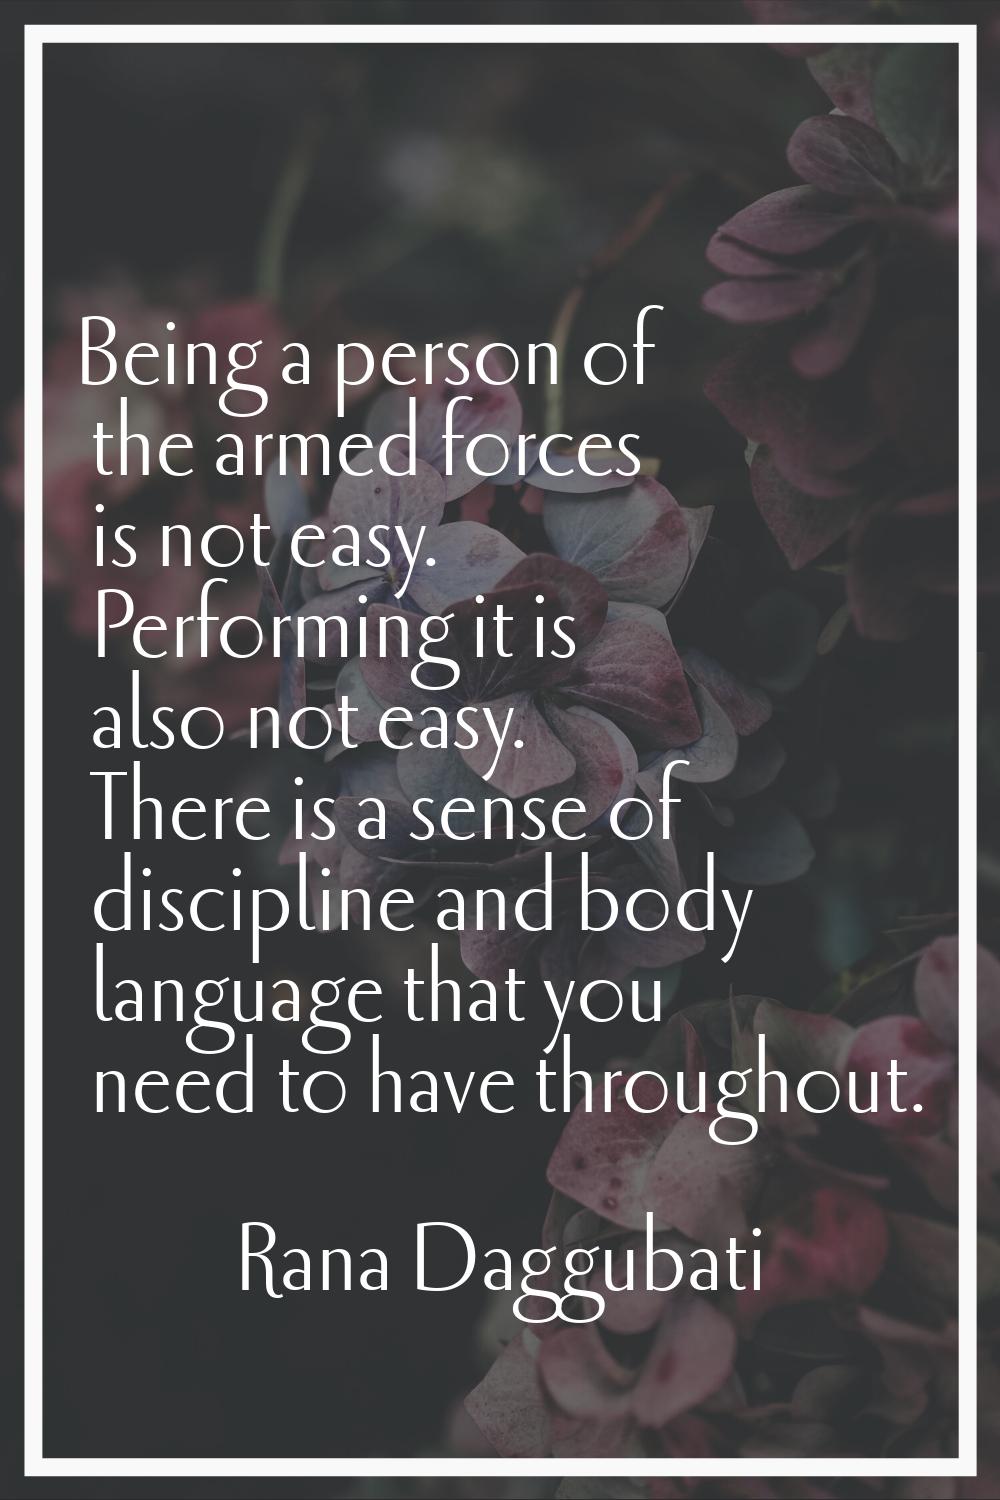 Being a person of the armed forces is not easy. Performing it is also not easy. There is a sense of